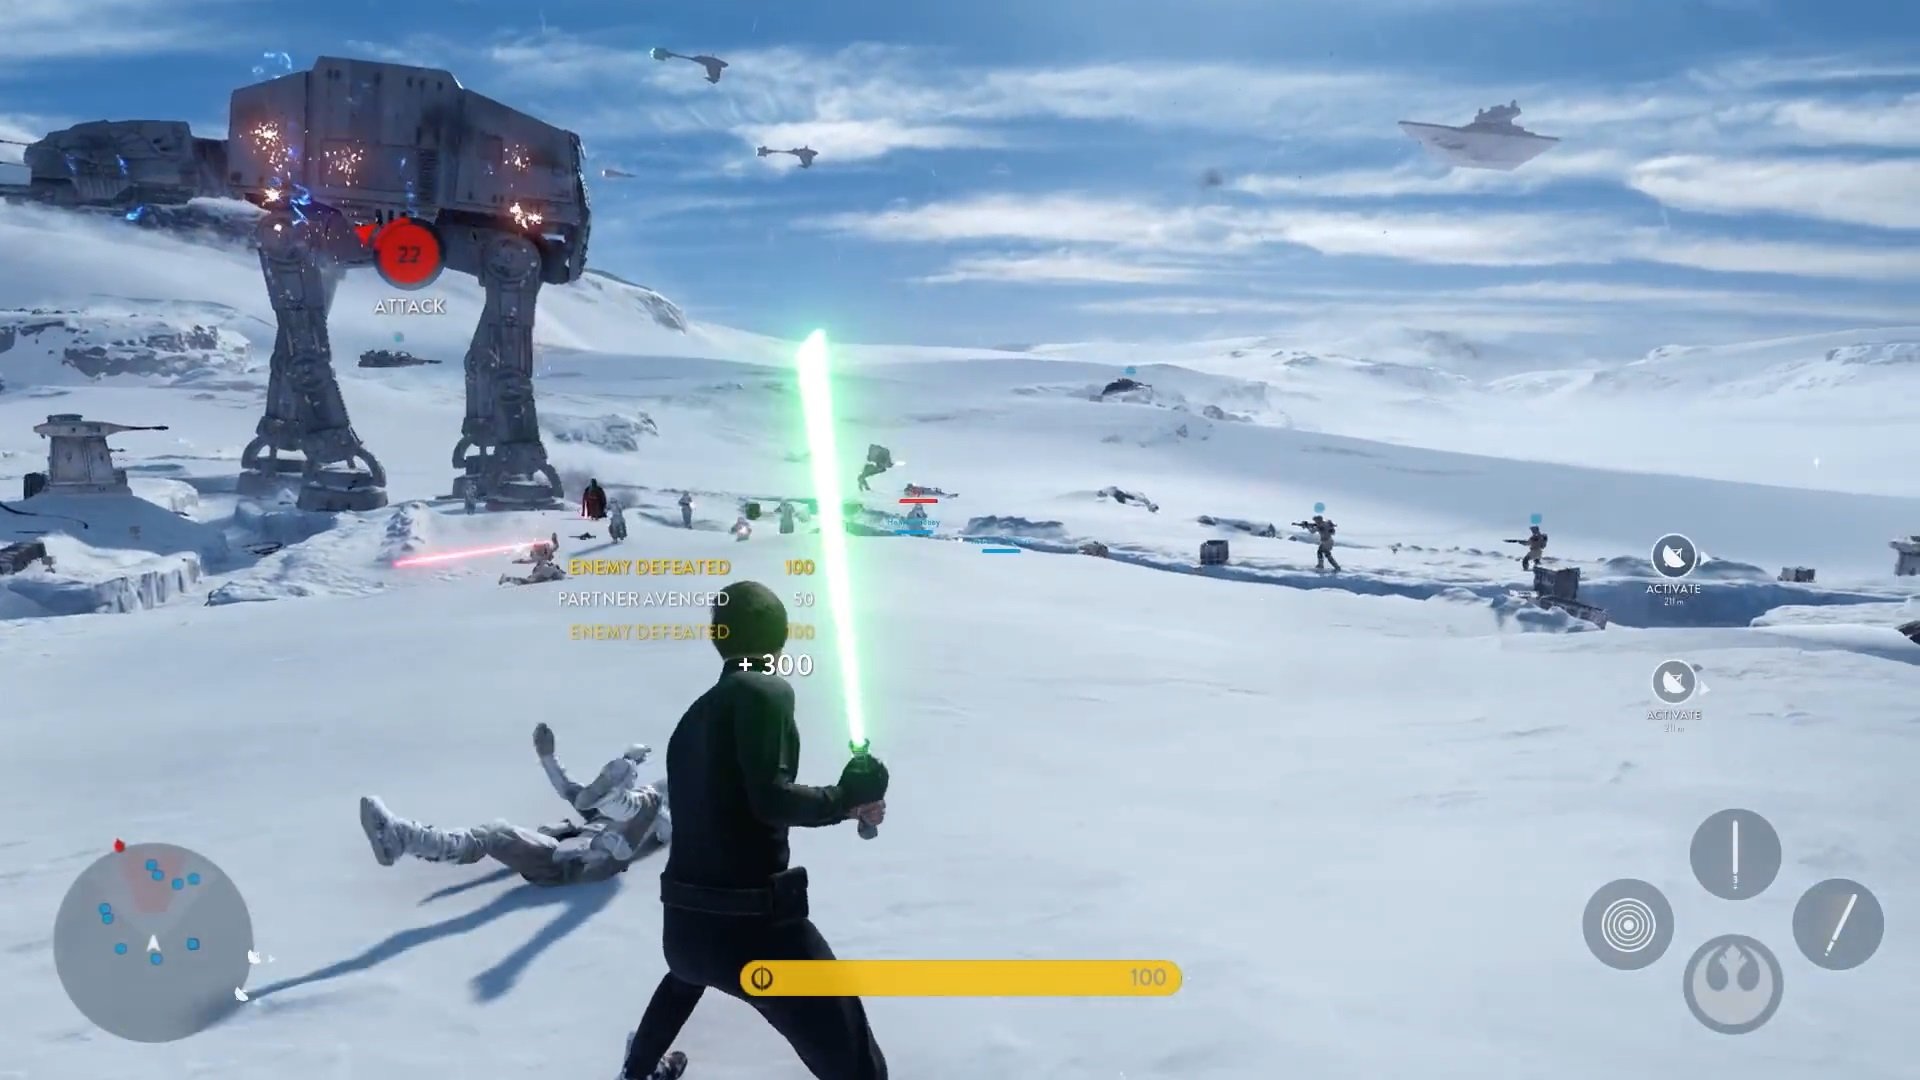 E3-2015-Darth-Vader-and-Luke-duel-in-Star-Wars-Battlefront-Multiplayer-Gameplay-footage-1